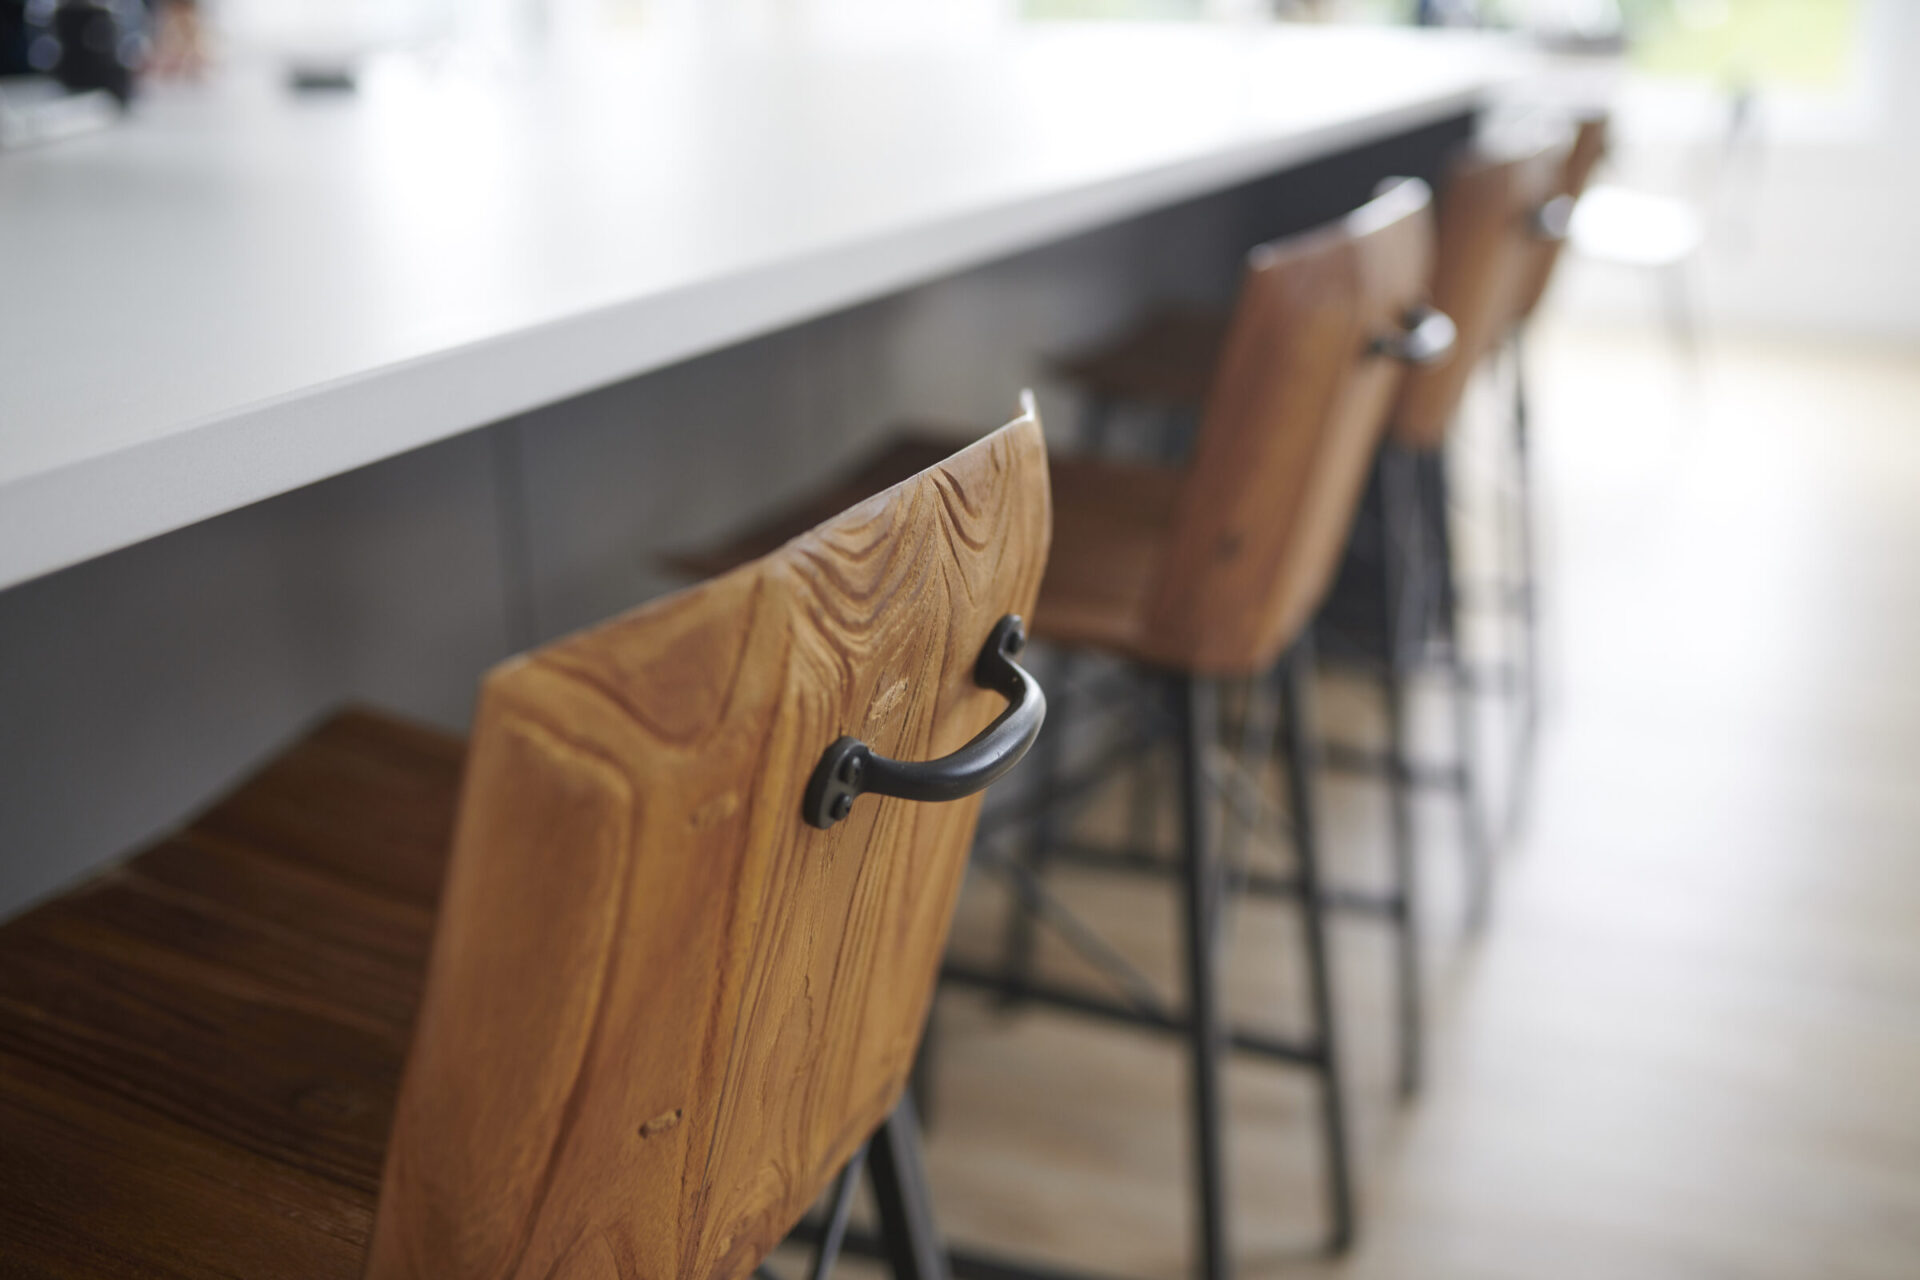 A modern kitchen bar with stylish wooden stools, black metal legs, set against a white countertop and a blurred background with bright lighting.